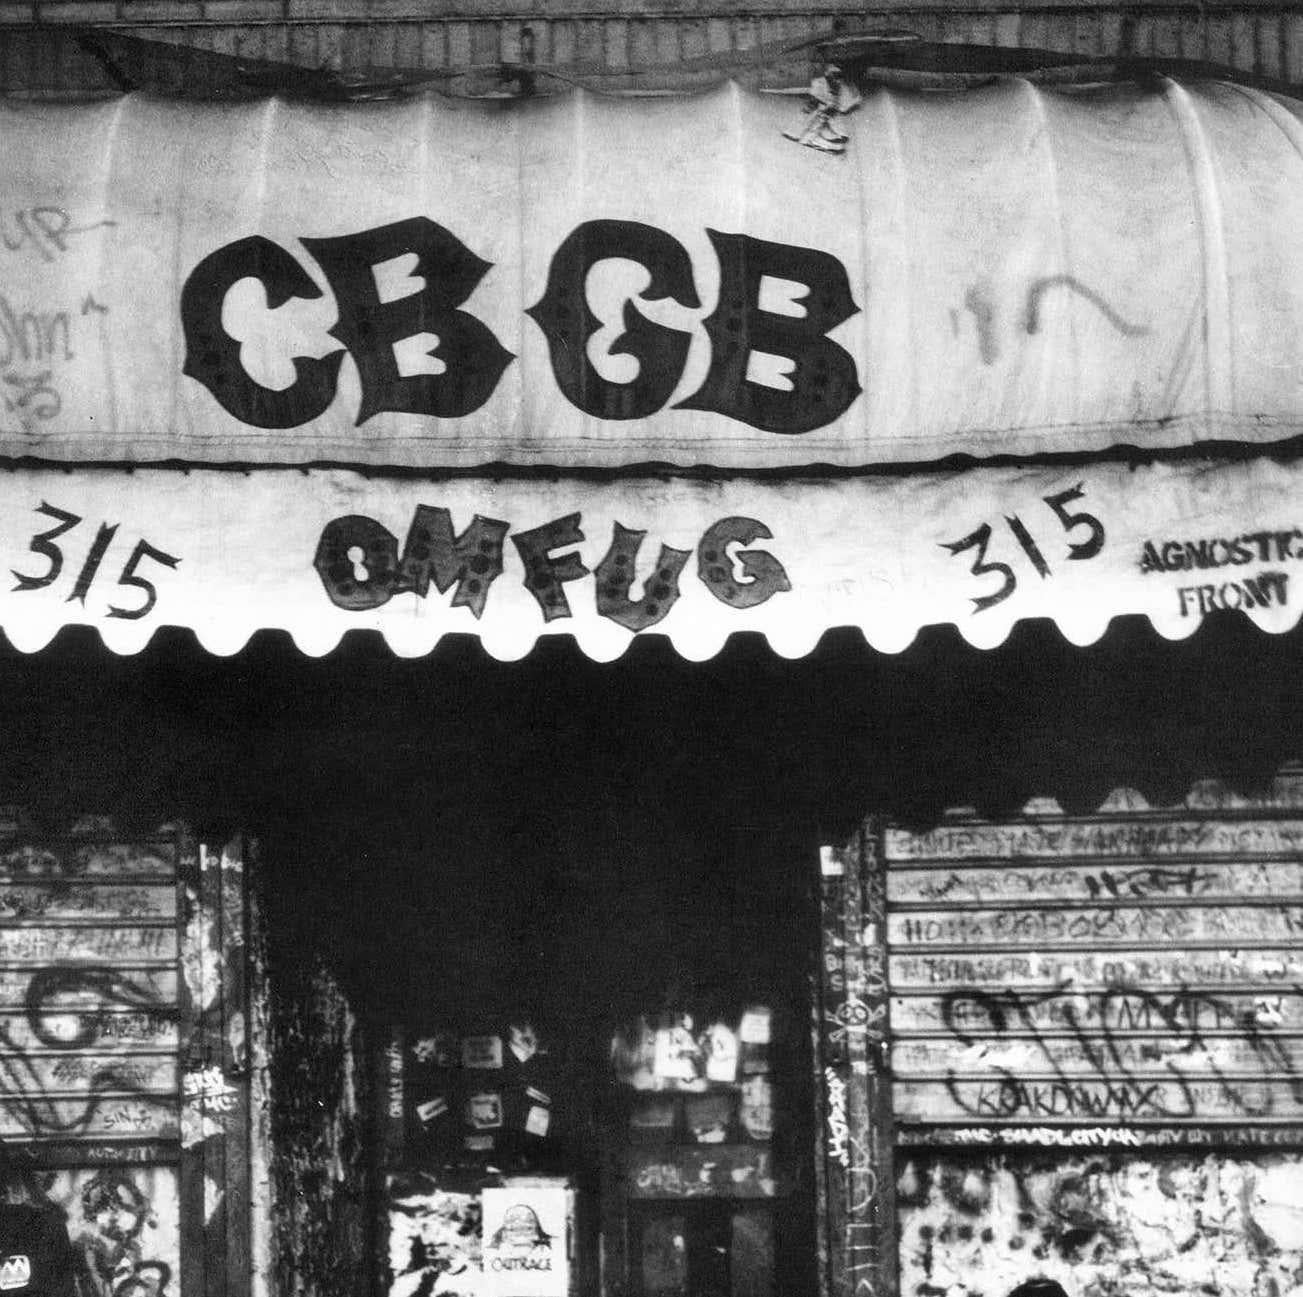 CBGB, The Birthplace of Punk - captured by heralded New York underground photographer Fernando Natalici: Manhattan, c.1982

Archival Inkjet Print.
Dimensions: 11 x 14 inches (full frame printed to the edges).
Hand signed, dated & numbered on the